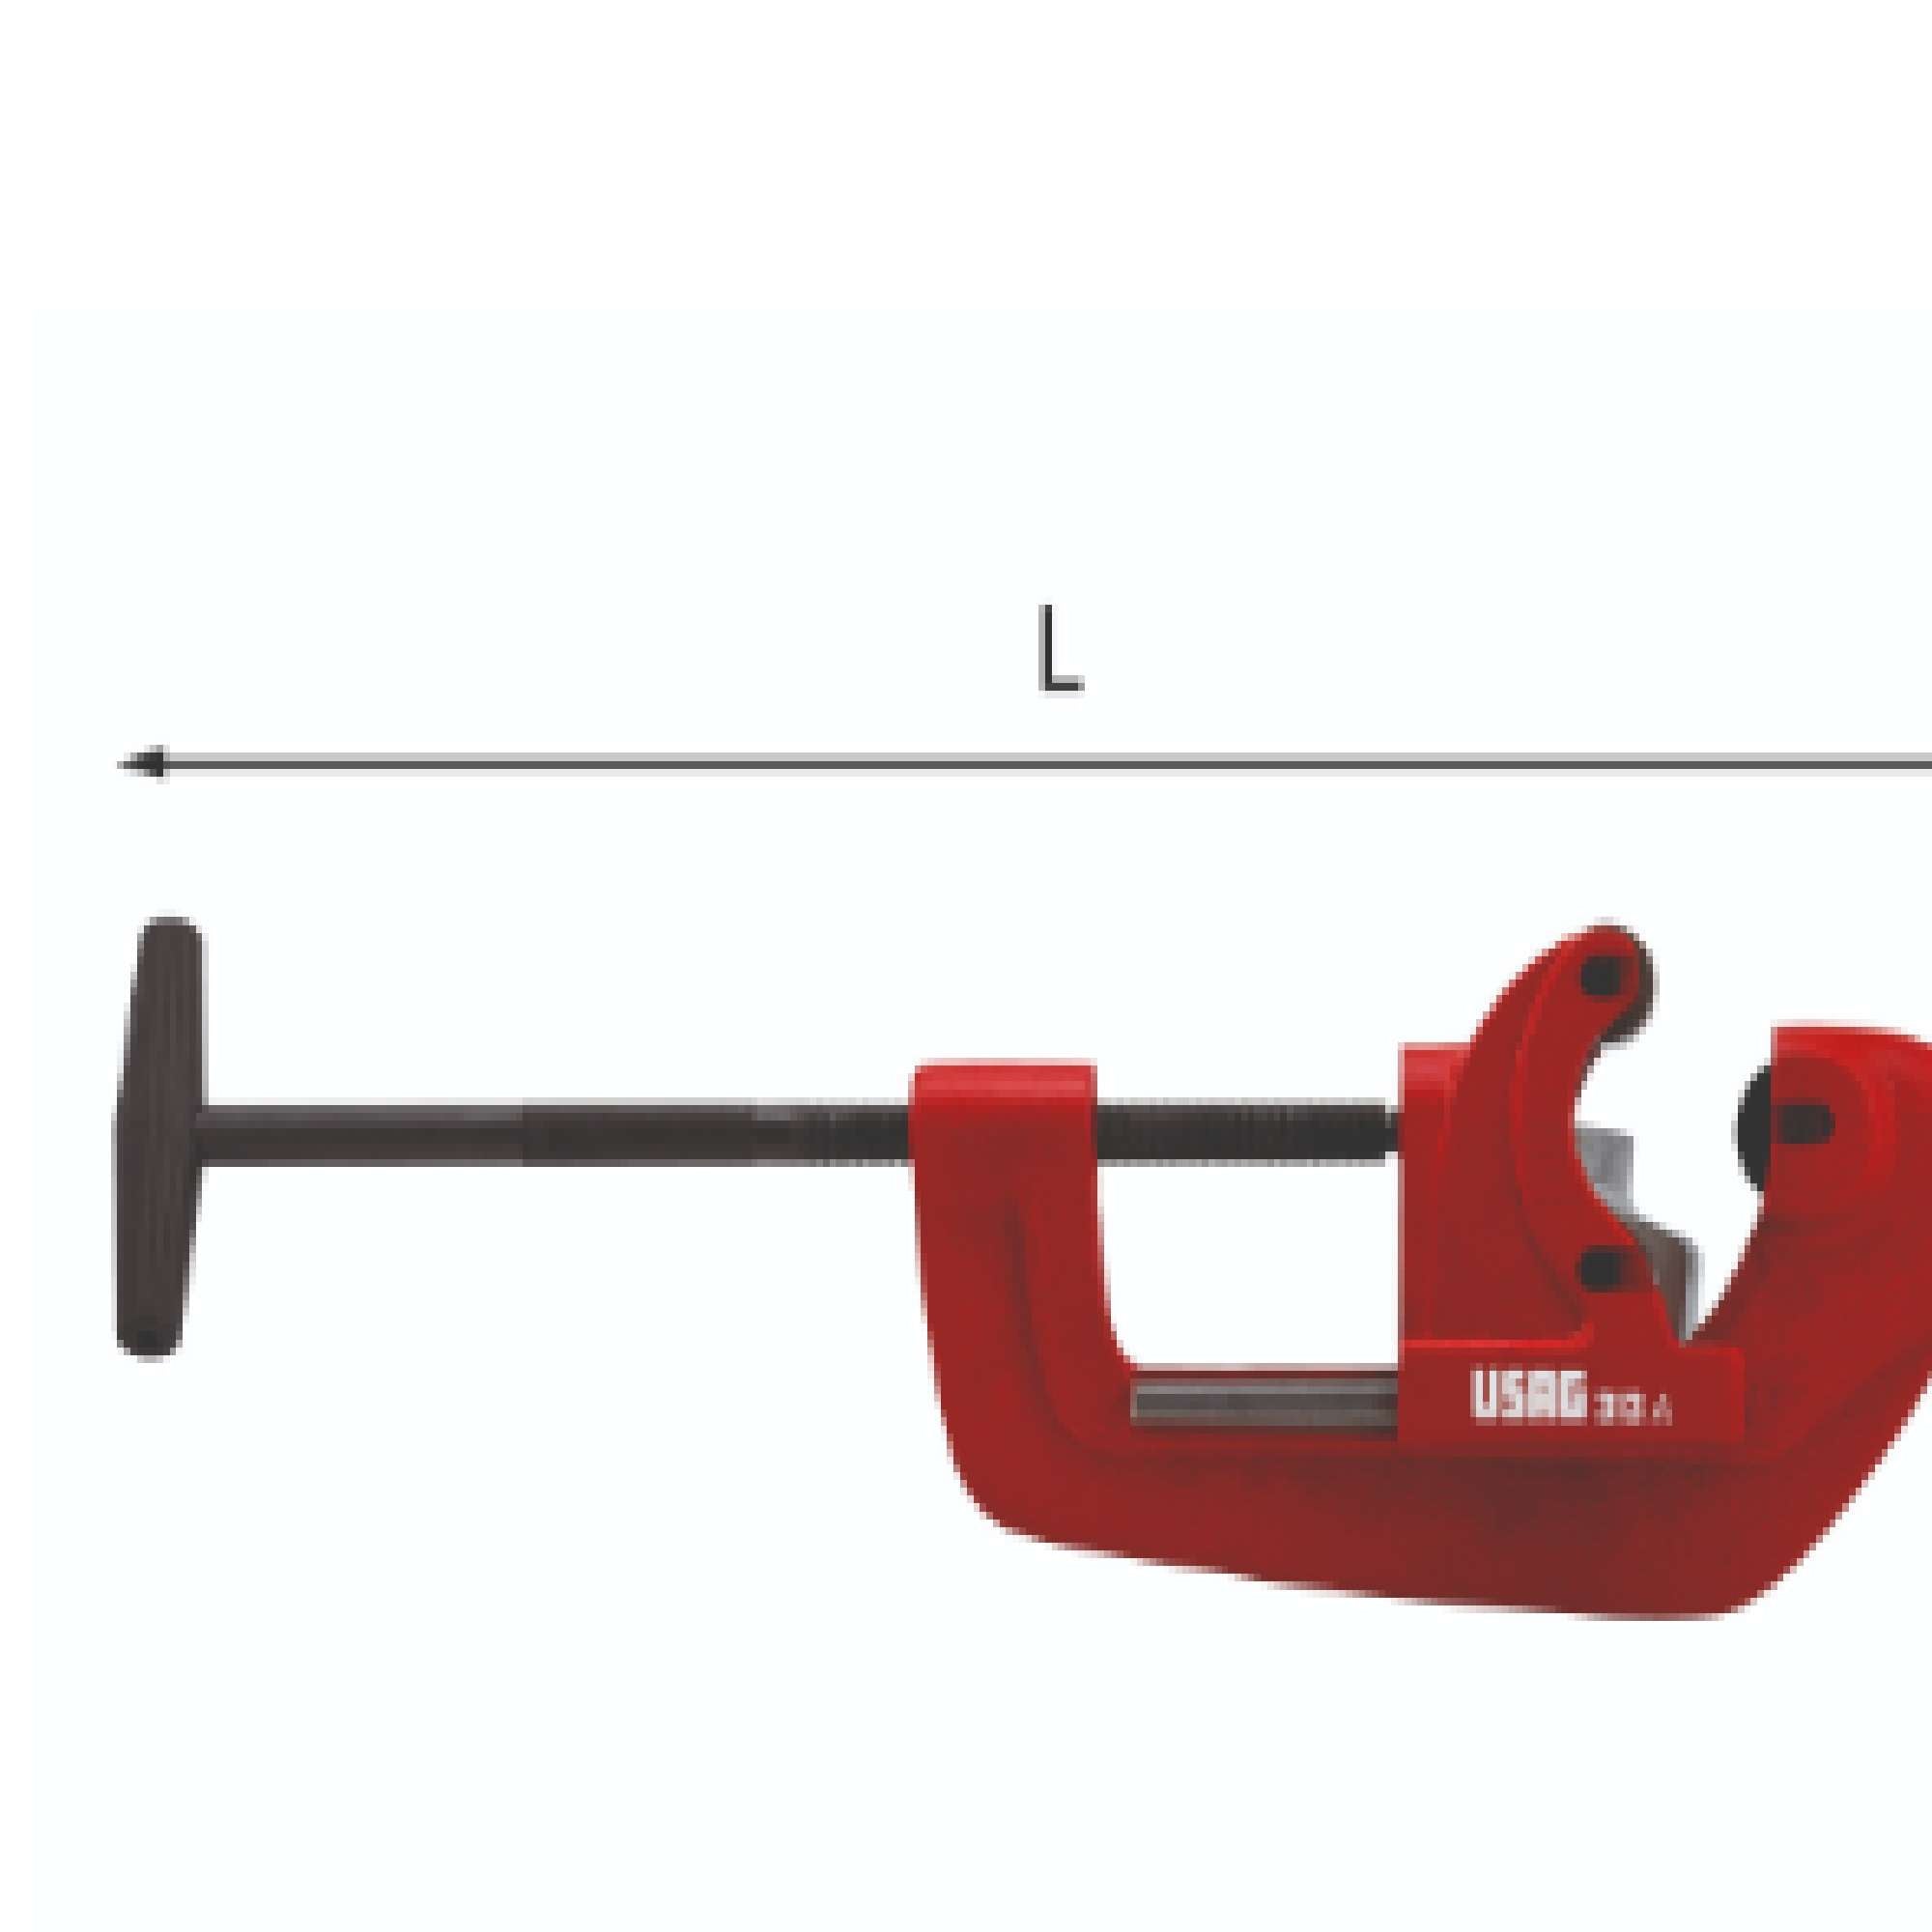 Pipe cutter for steel and stainless steel, maximum pipe thickness 7 mm - Usag 313 A 21-60